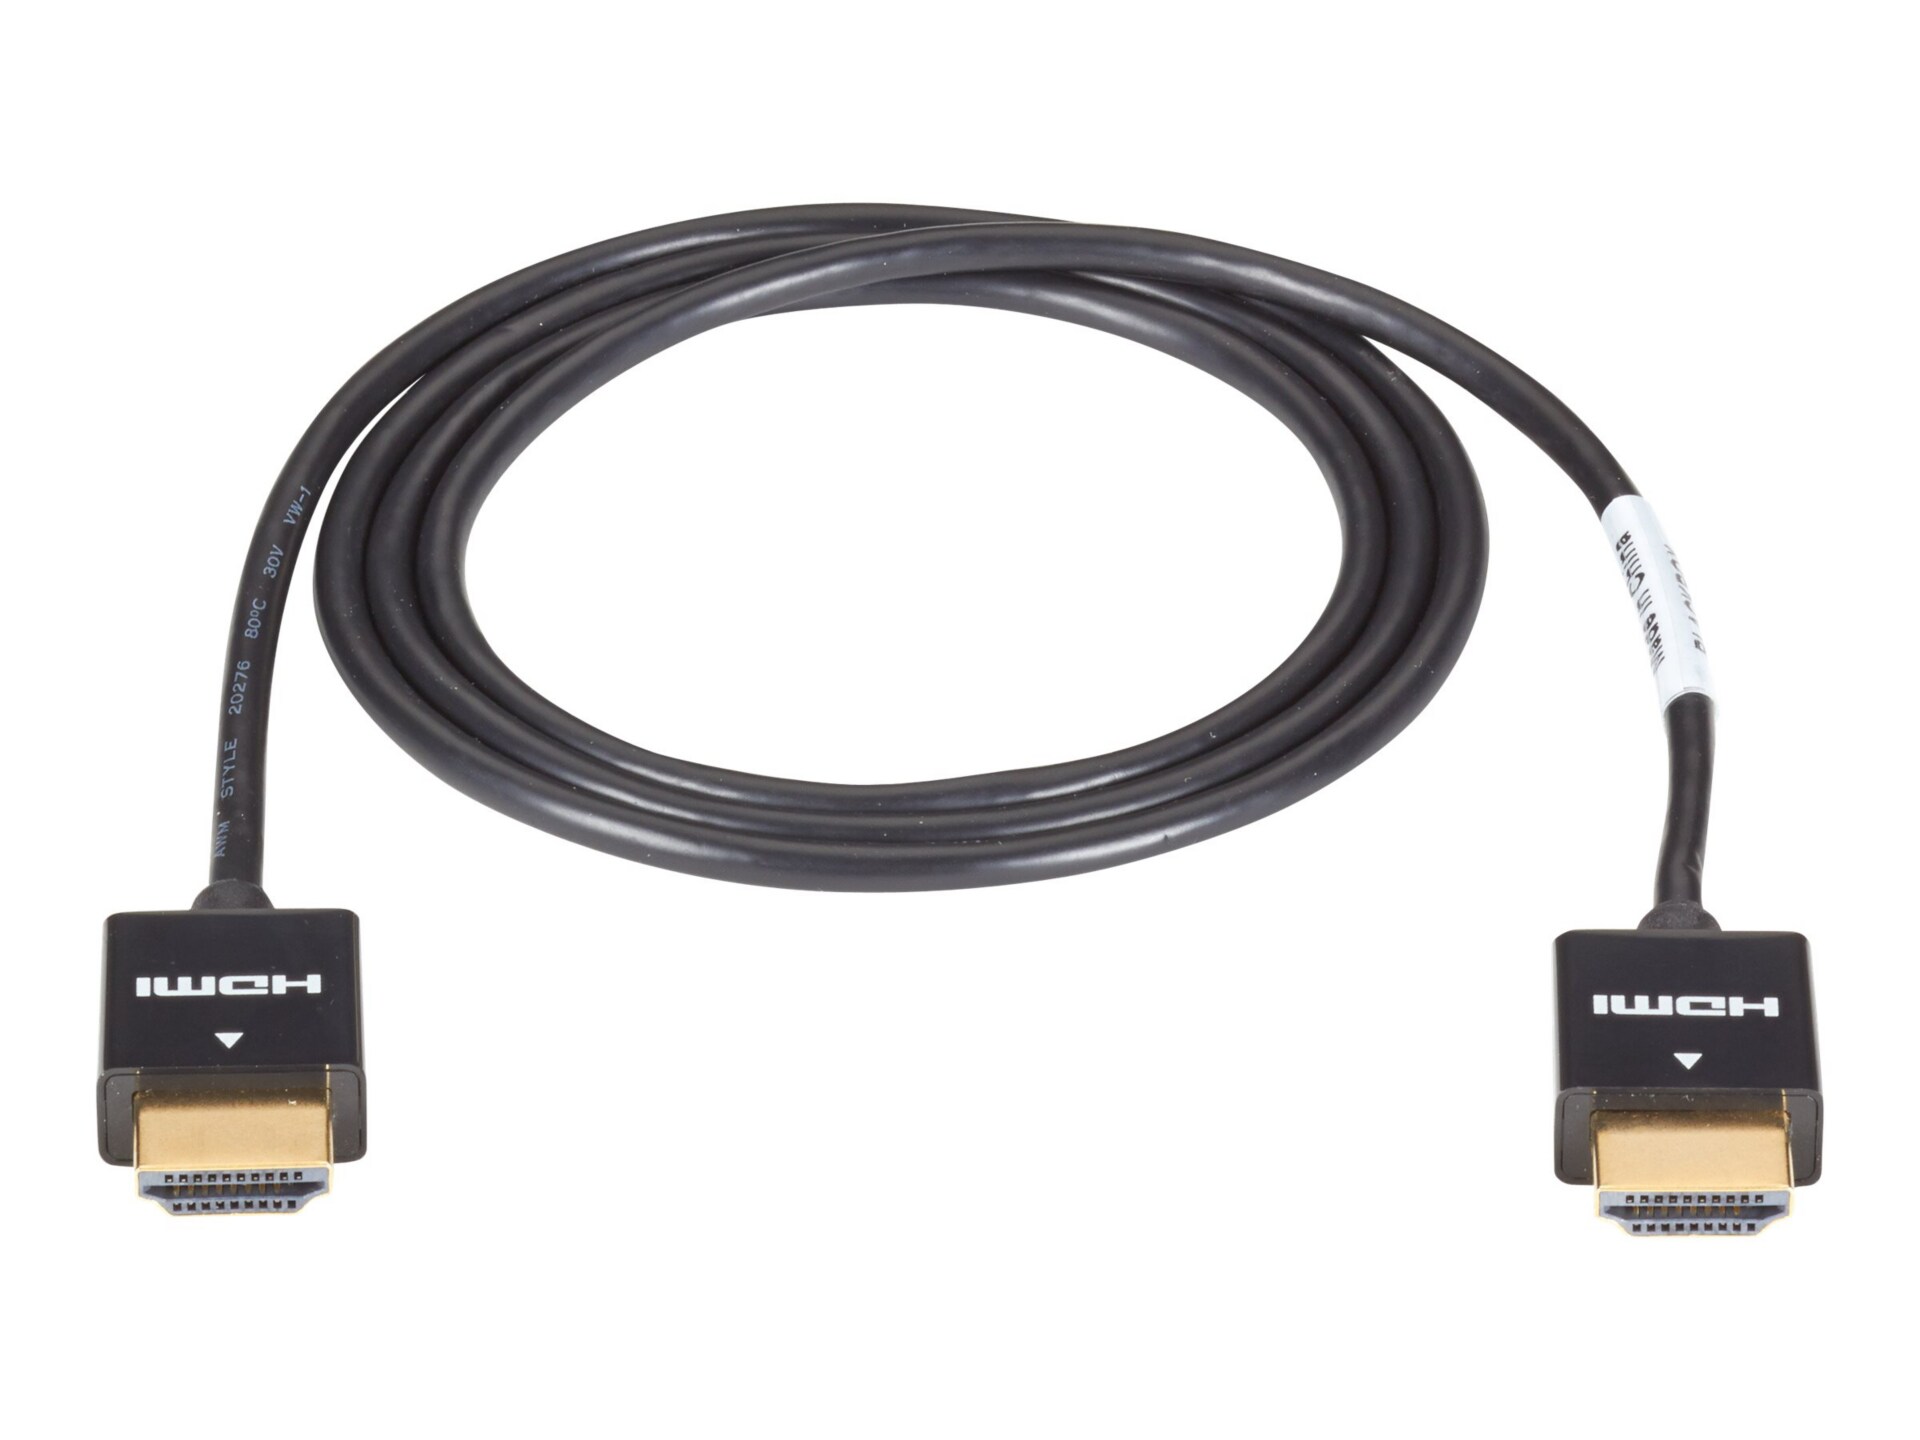 Black Box SlimLine High-Speed HDMI Cable - 3-m (9.8-ft.) - HDMI cable - 3 m